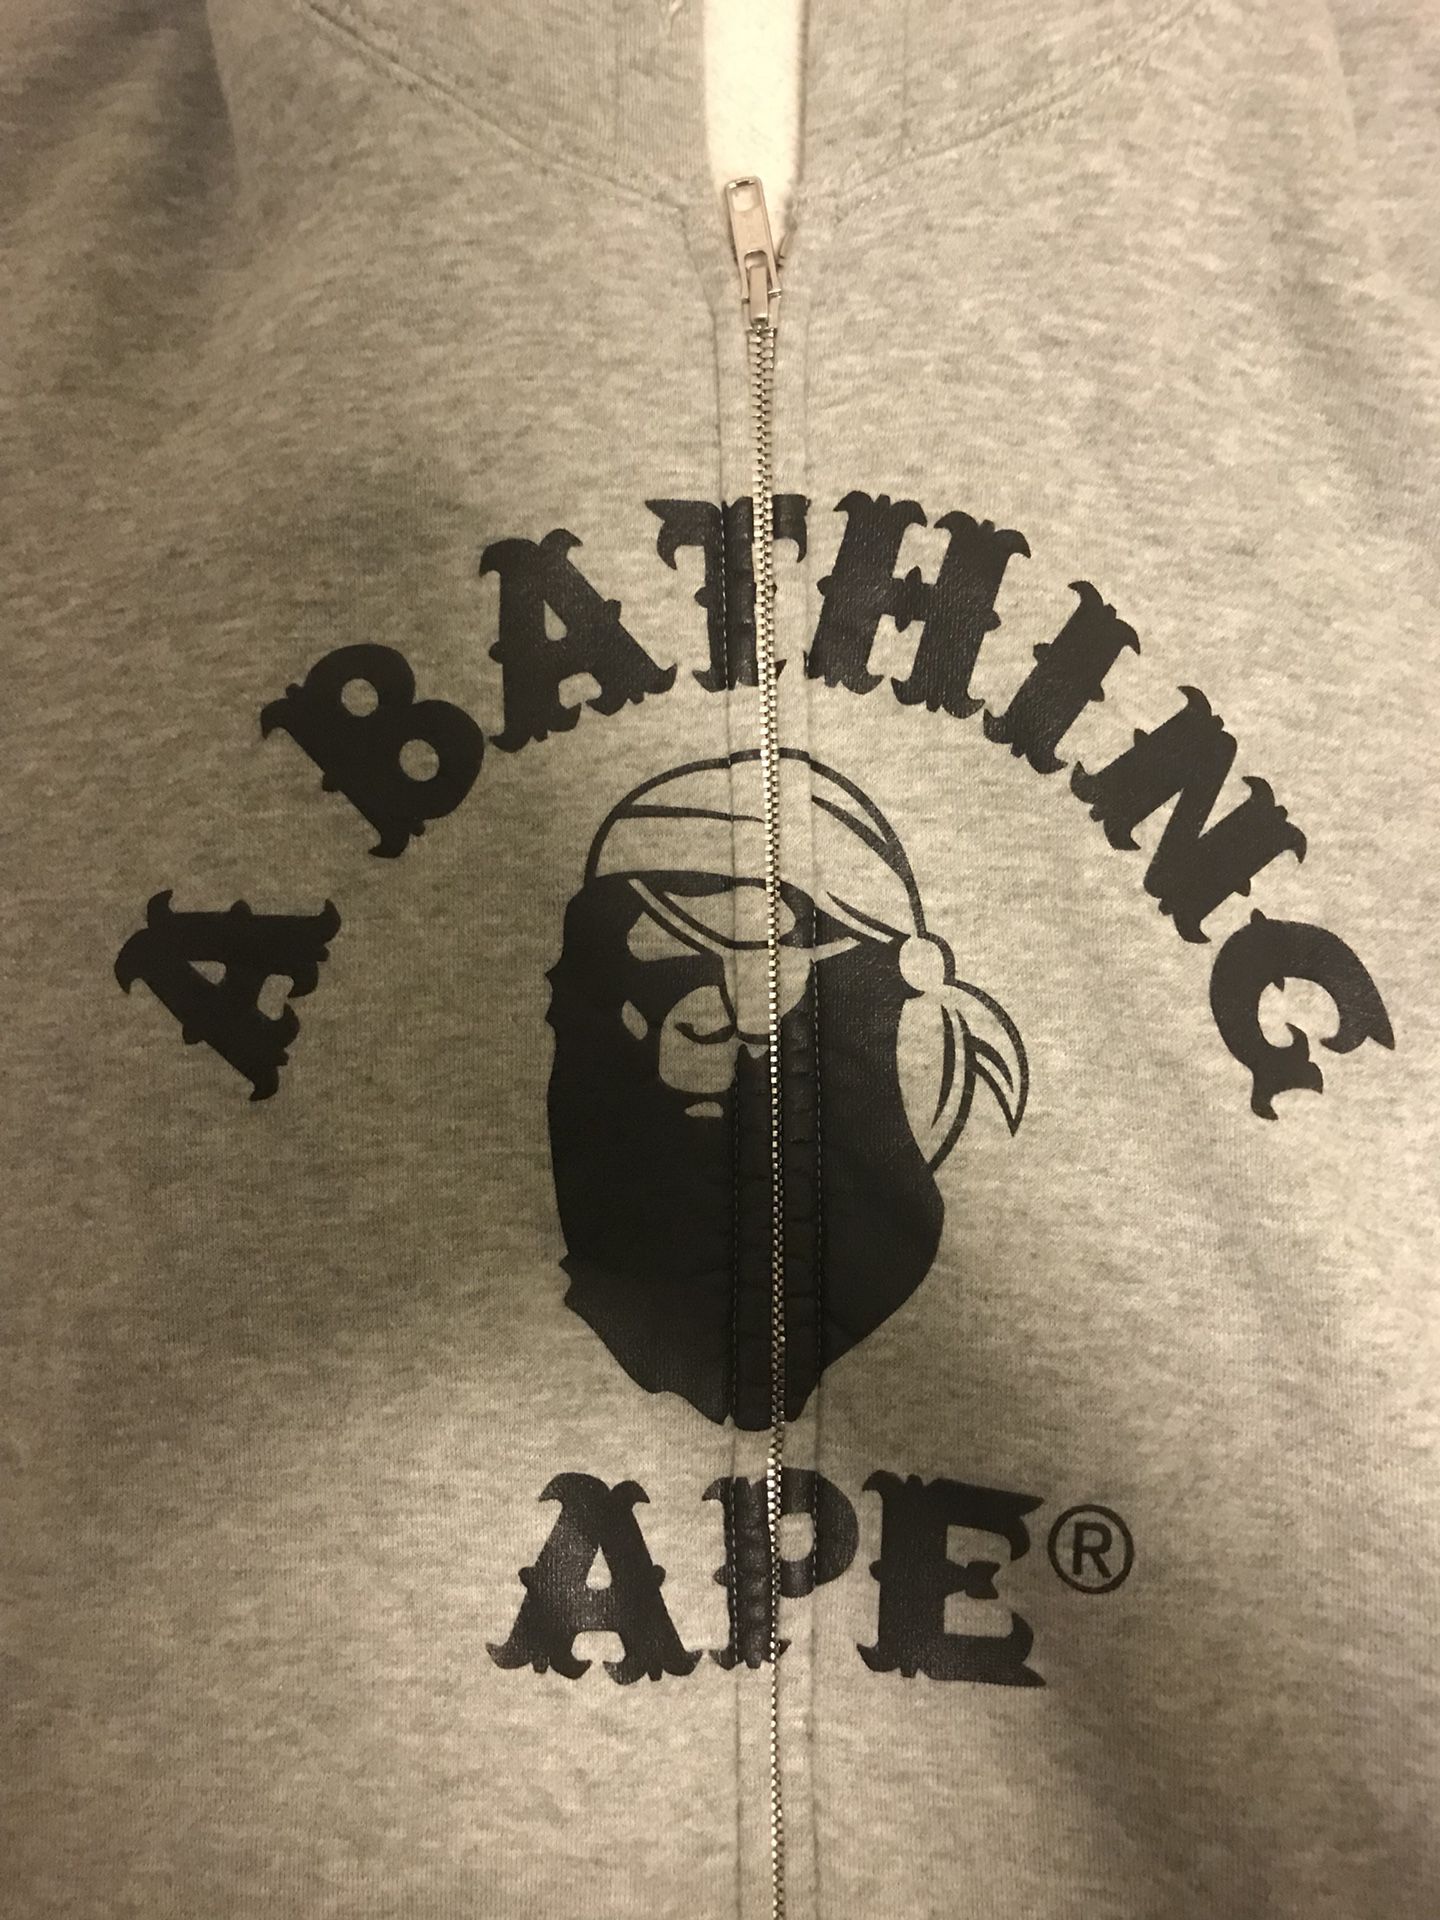 Supreme bathing ape hoodie size large 9/10 condition